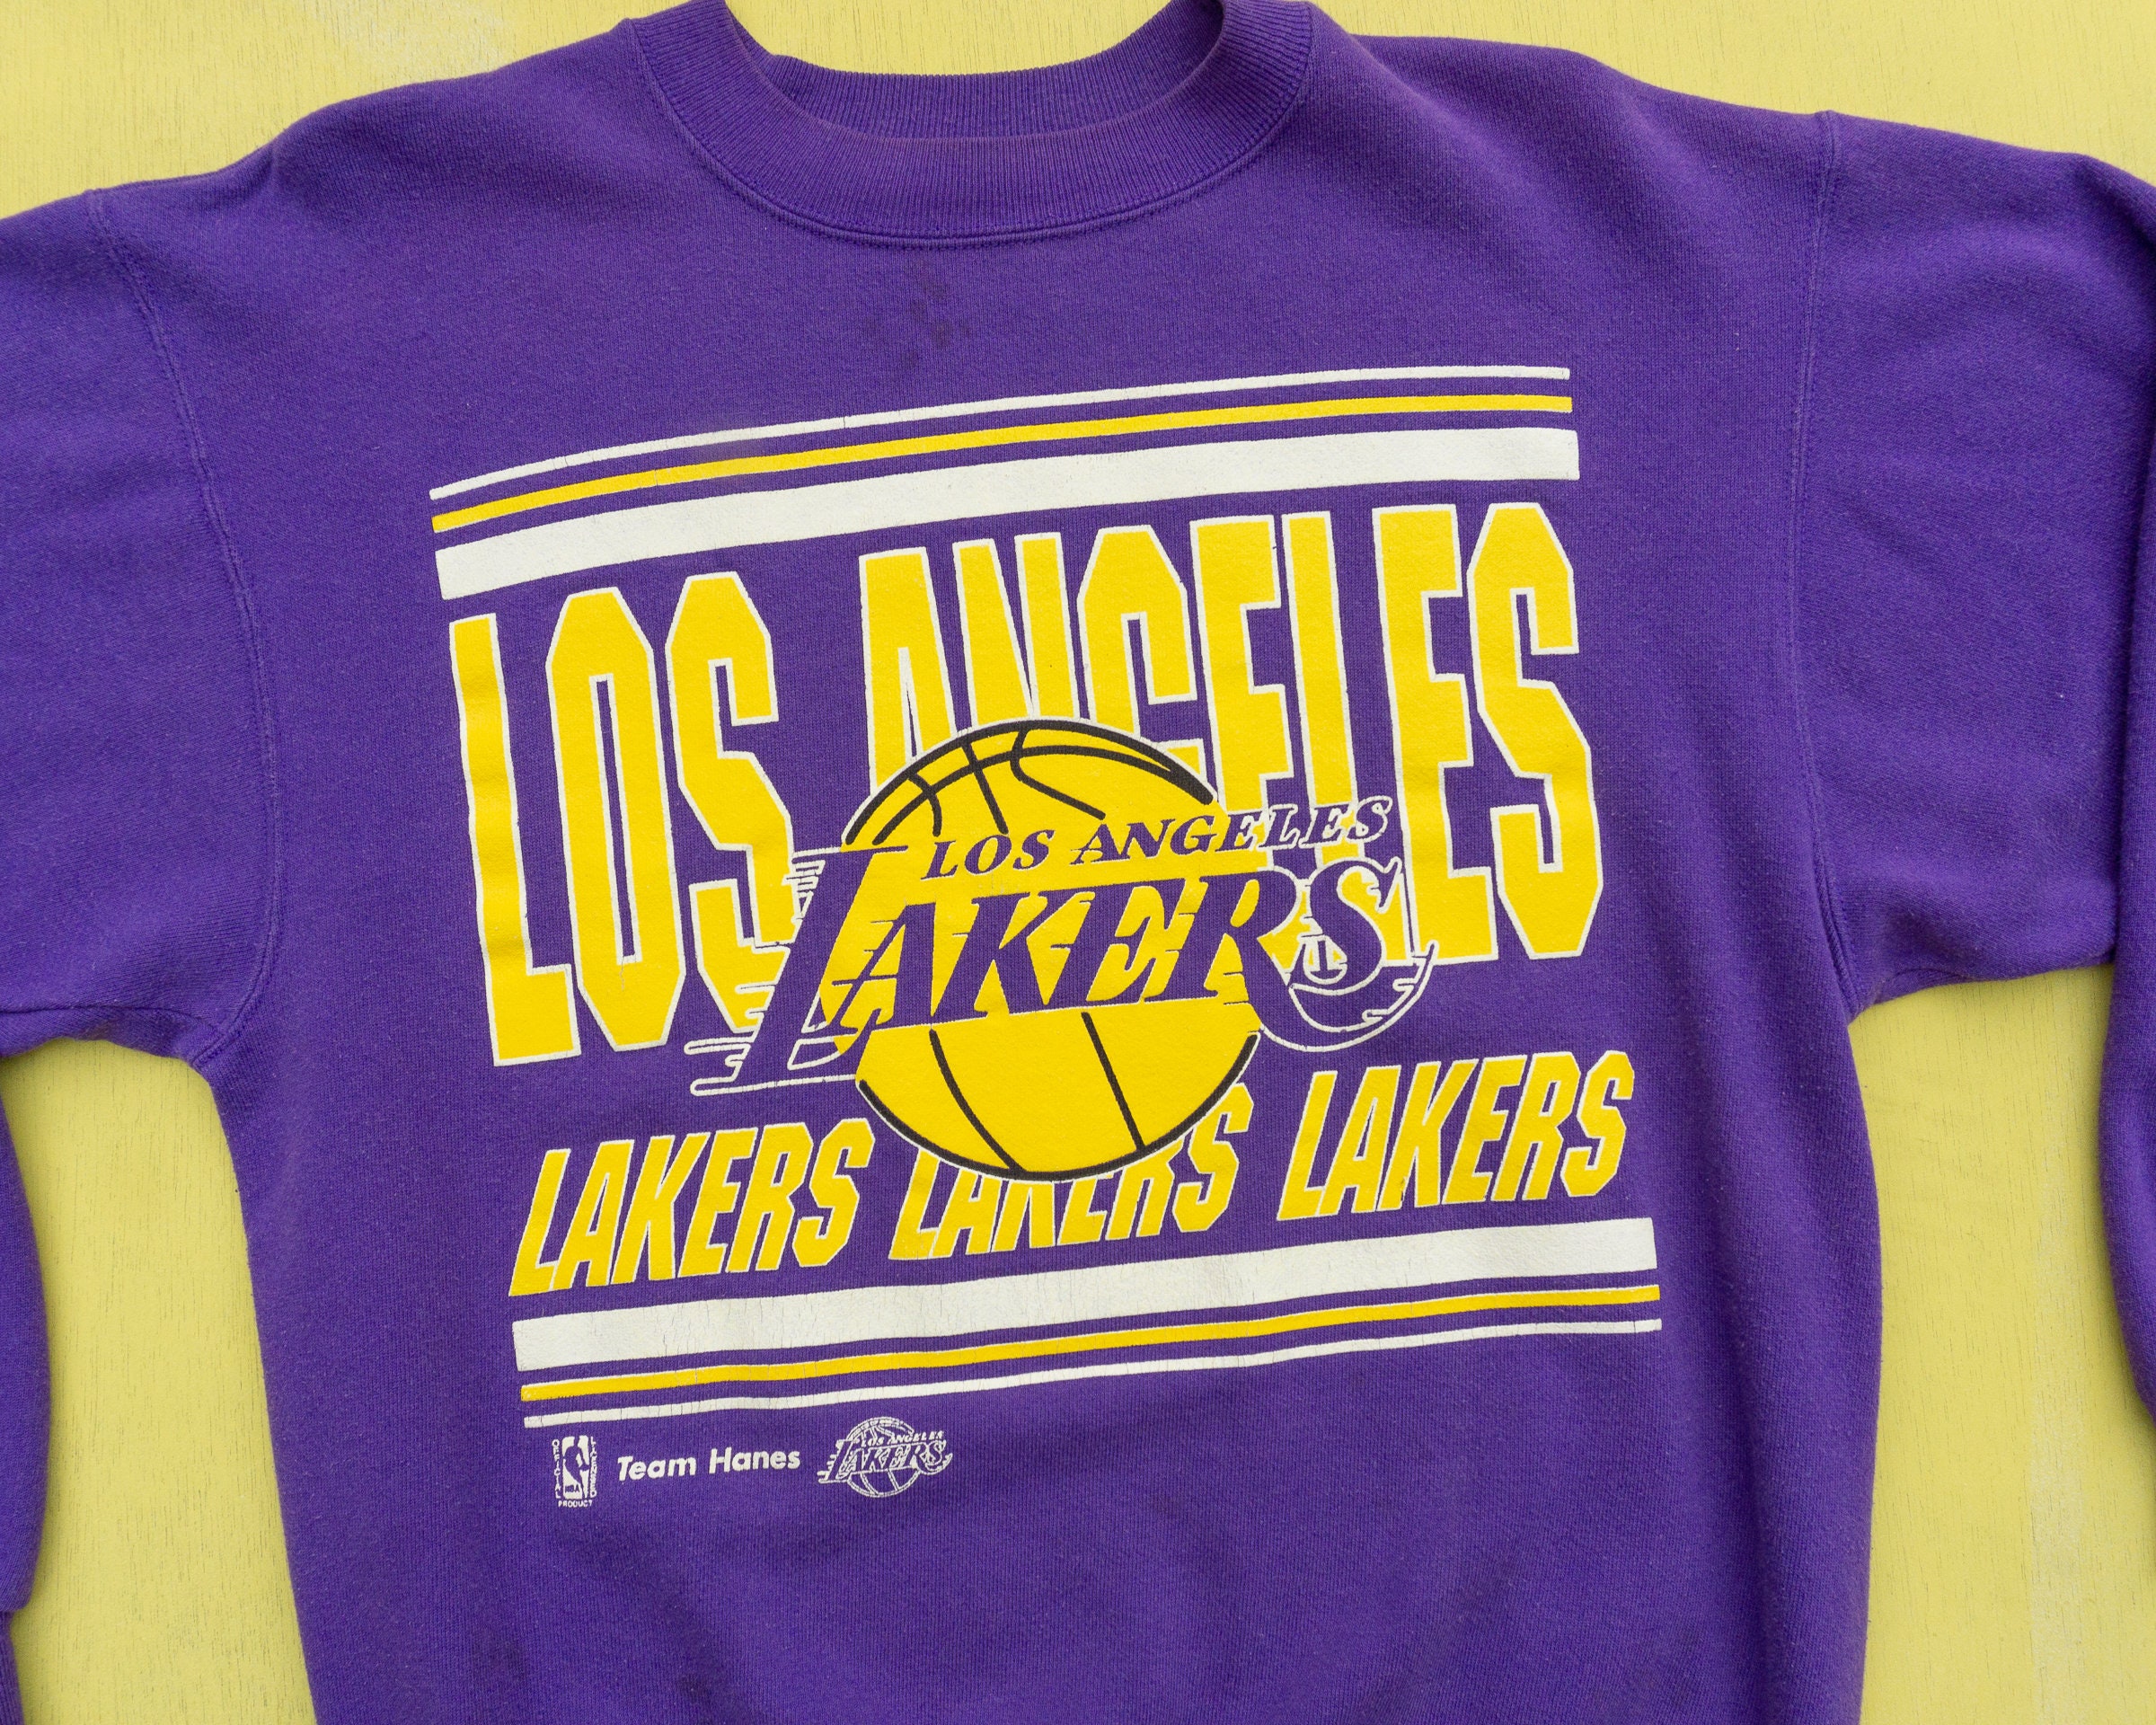 Vintage 80s LA LAKERS Basketball Club by Tultex Los Angeles M Size Sweater